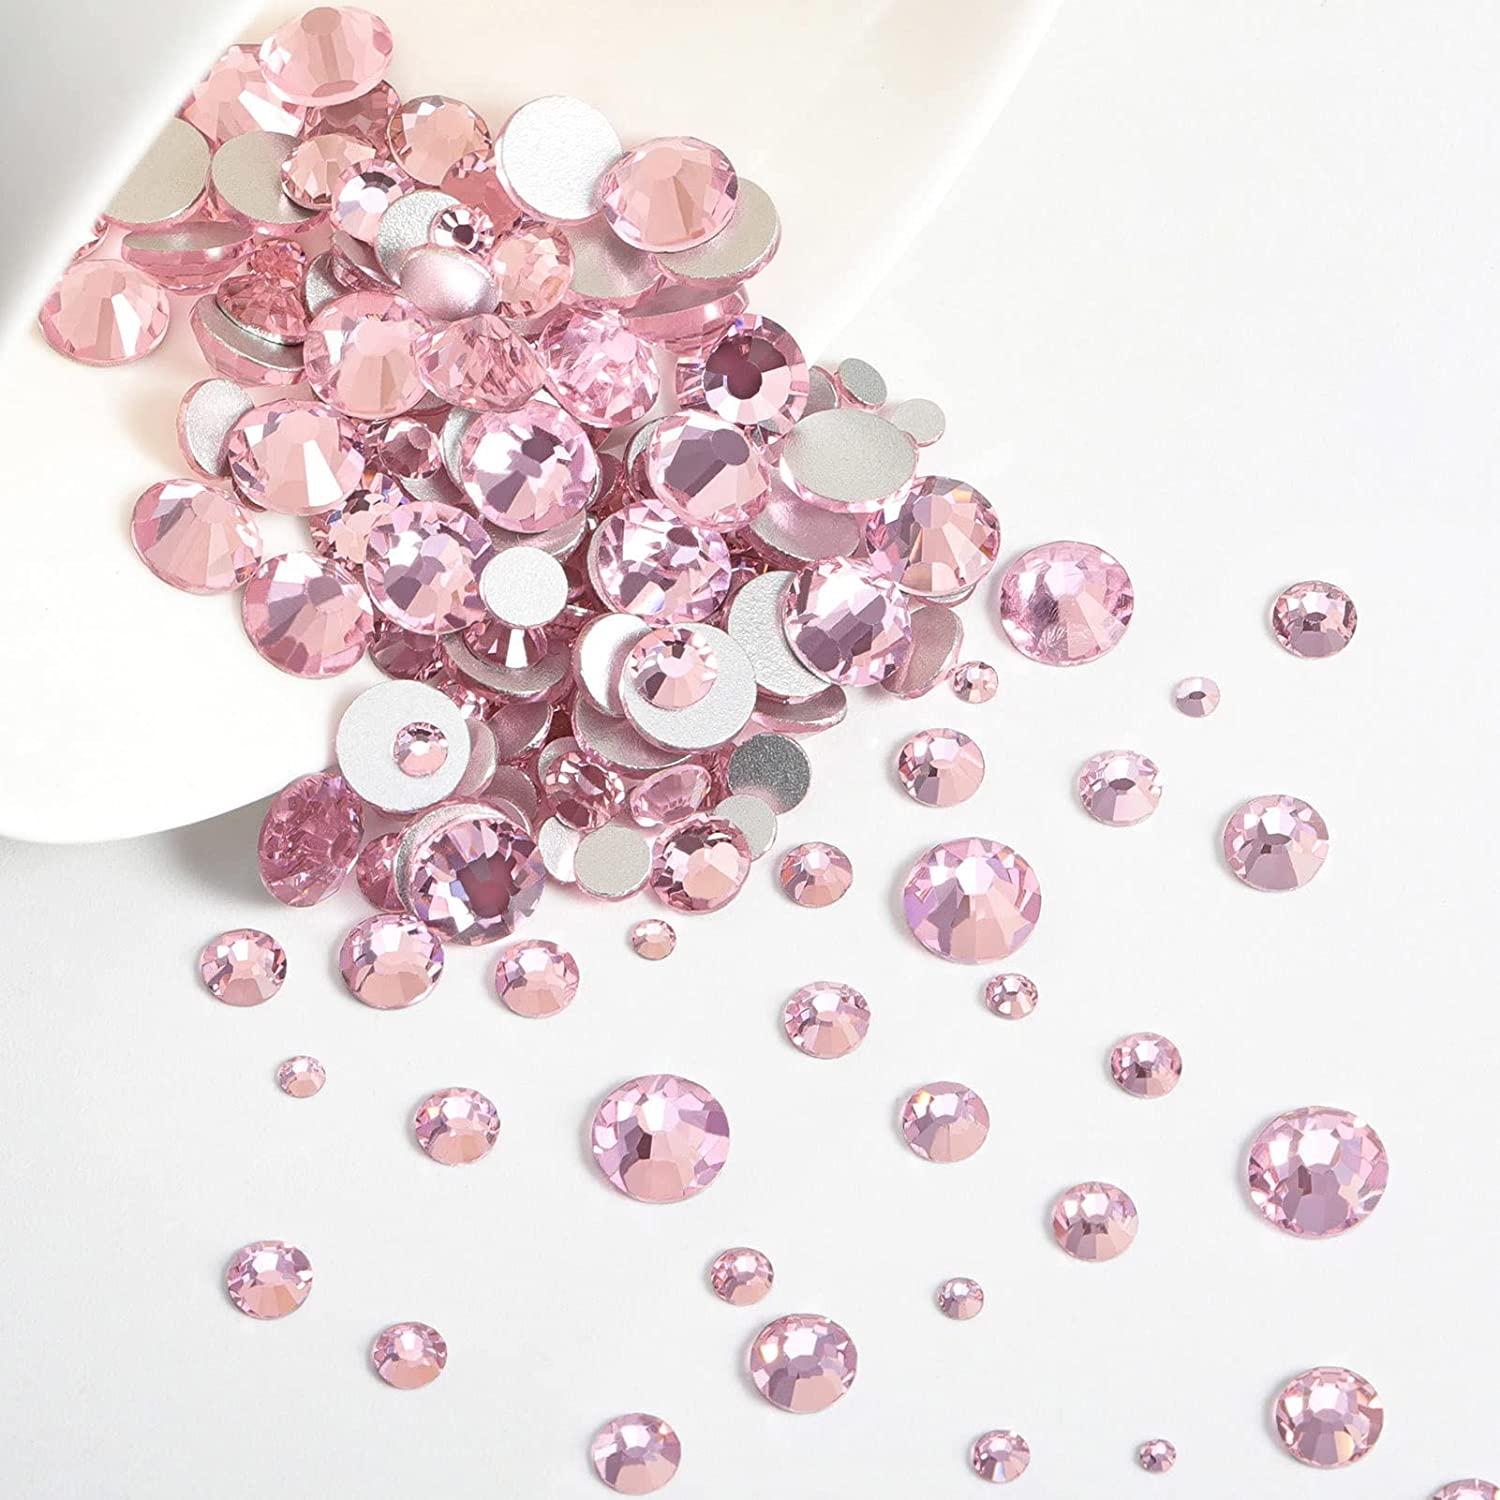 The Crafts Outlet Flatback Rhinestones, Faceted Square, 3mm, 10000-pc, Light Pink